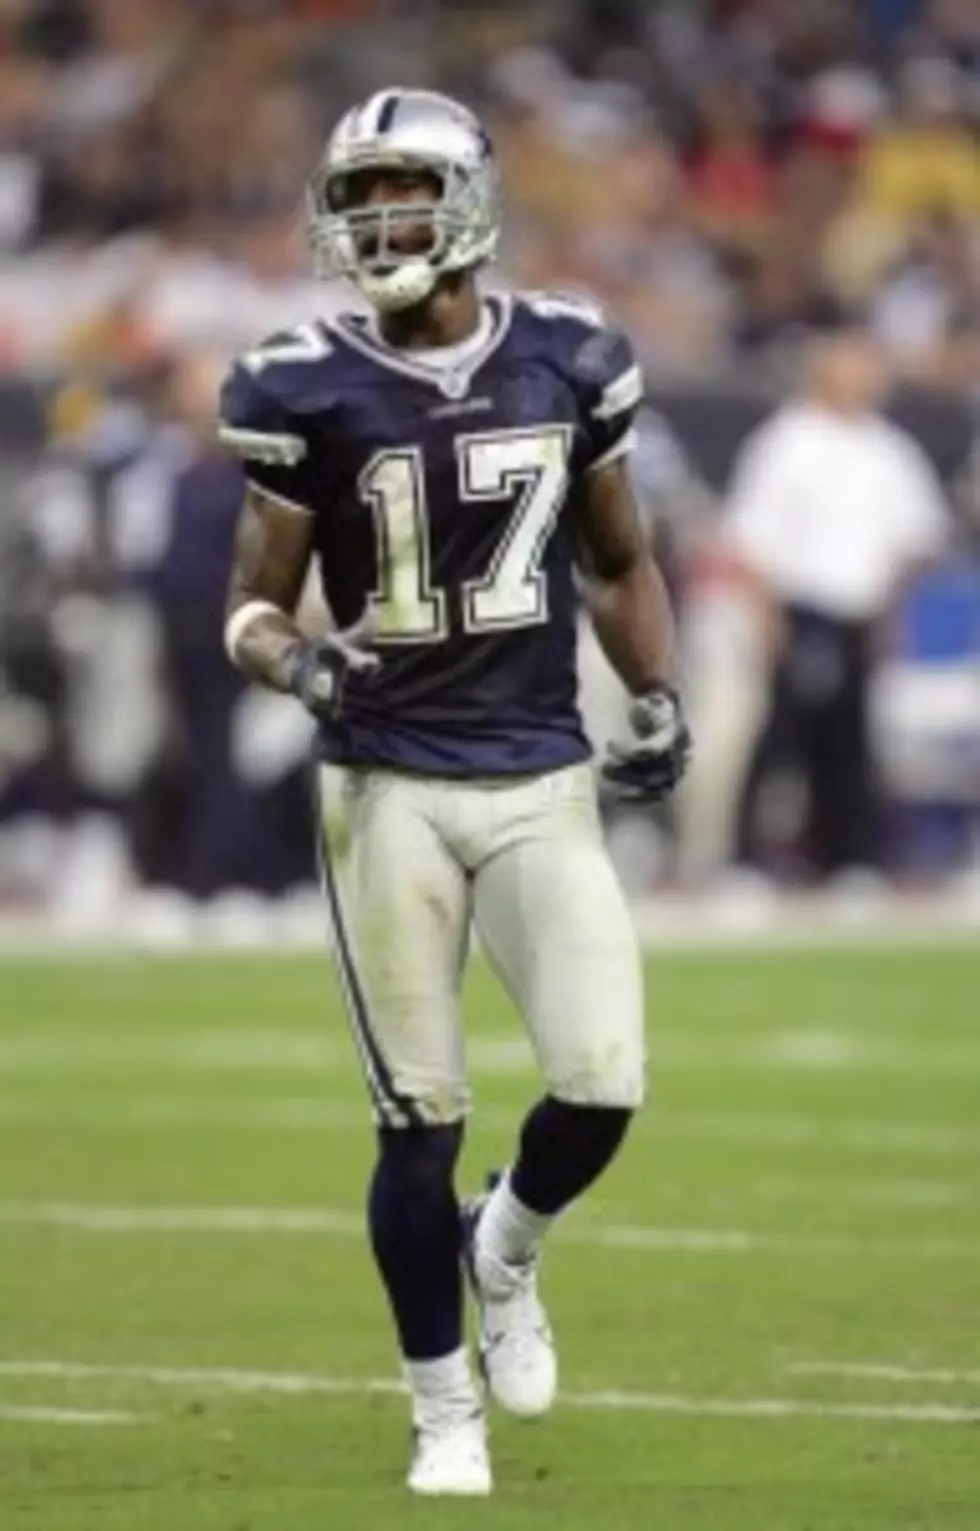 Former Dallas Cowboys WR Hurd Indicted on Drug Charges